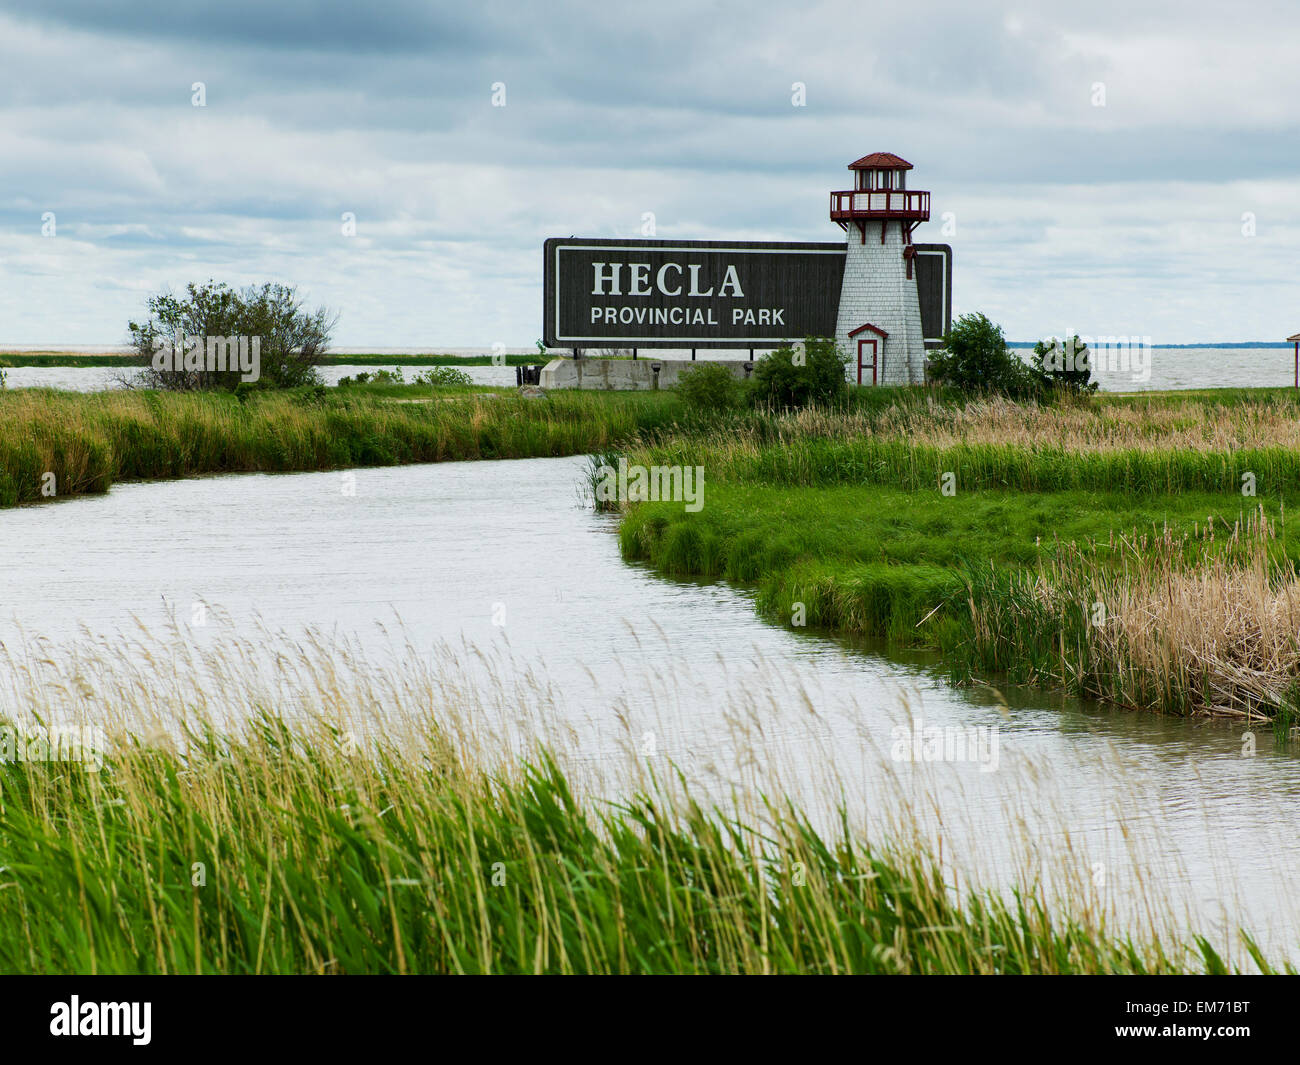 A sign for Hecla Provincial Park; Riverton, Manitoba, Canada Stock Photo